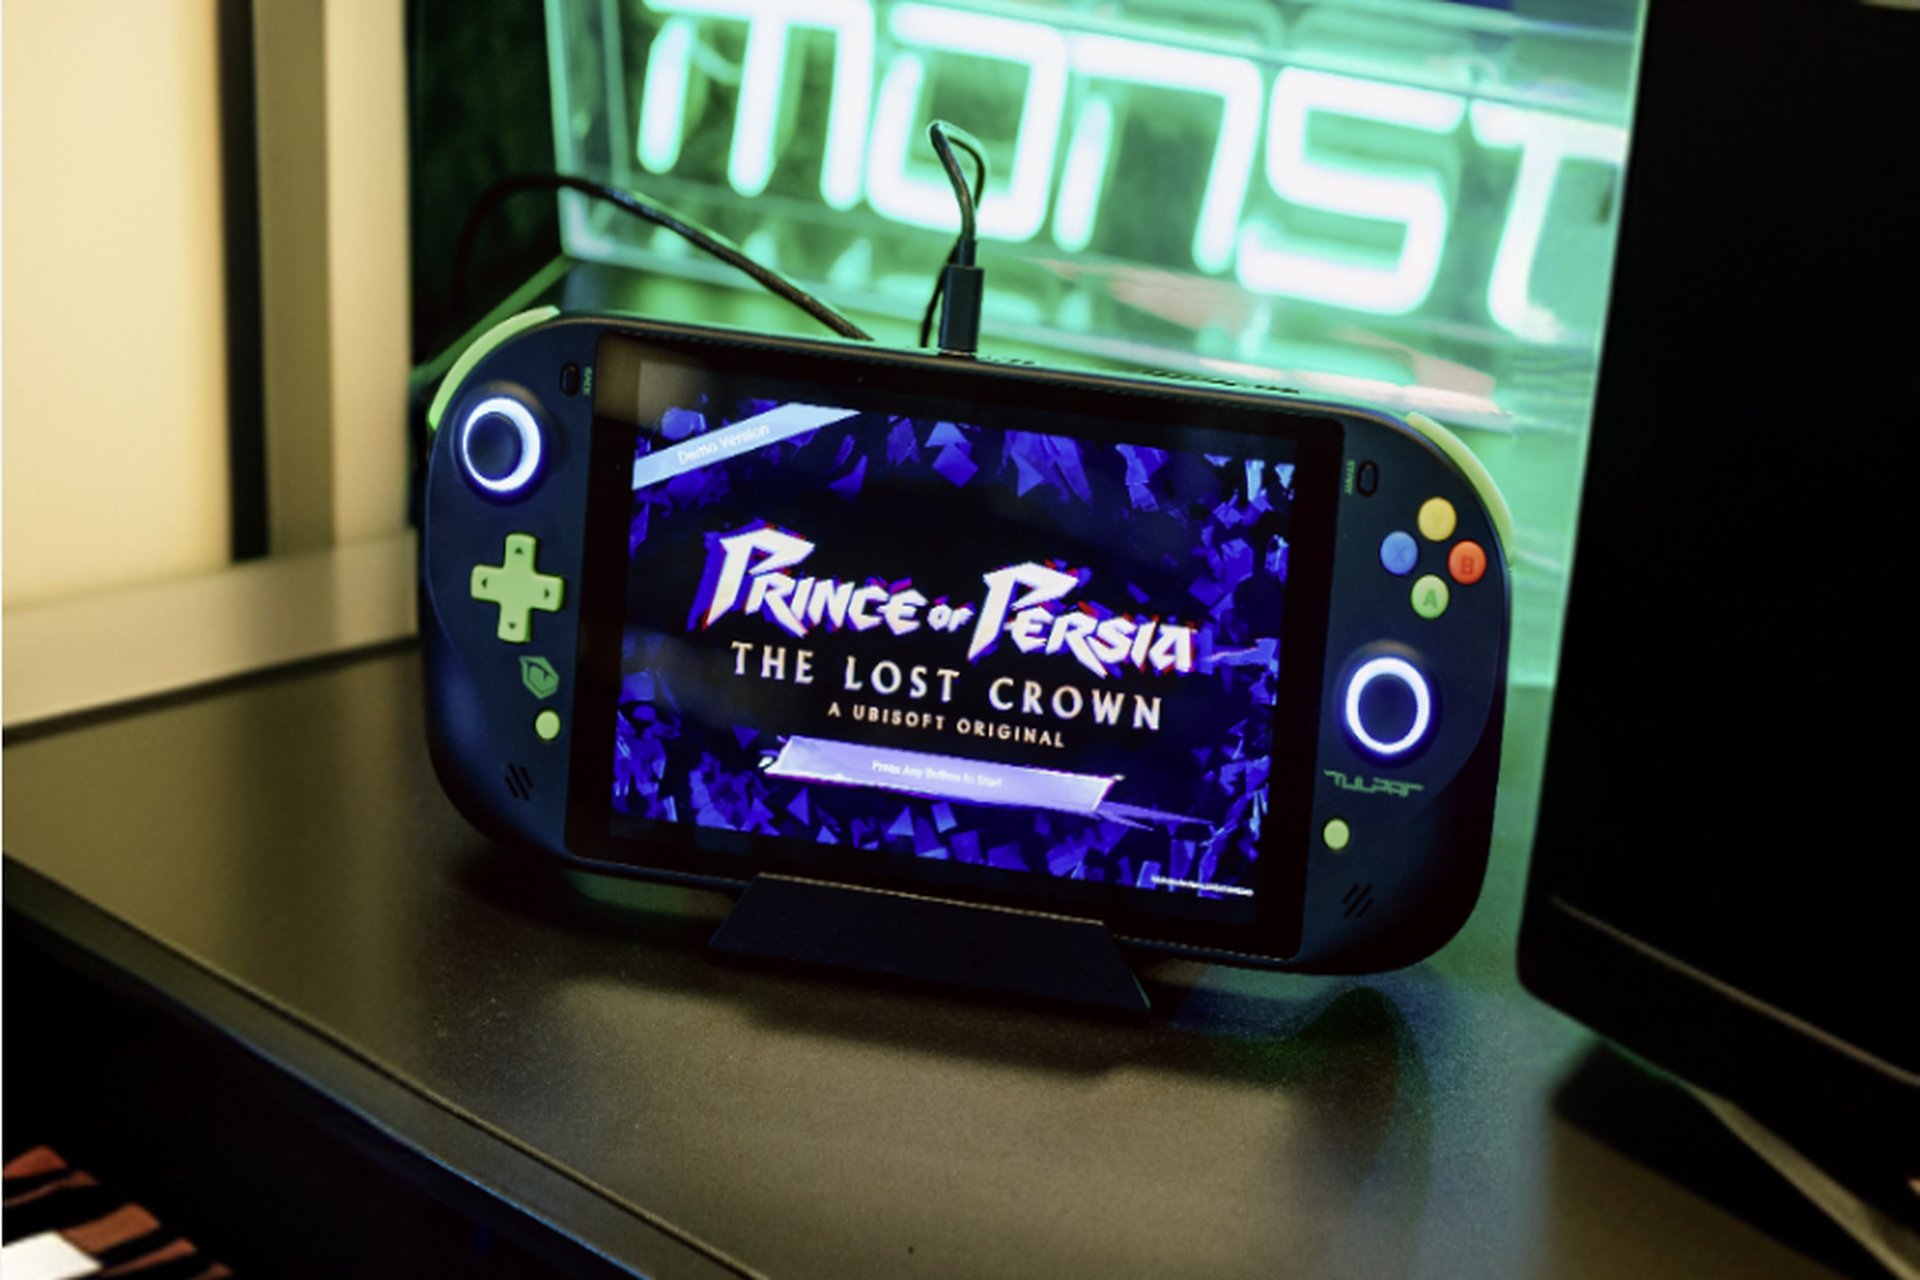 Tulpar Handheld Console featuring Prince of Persia on a Stand